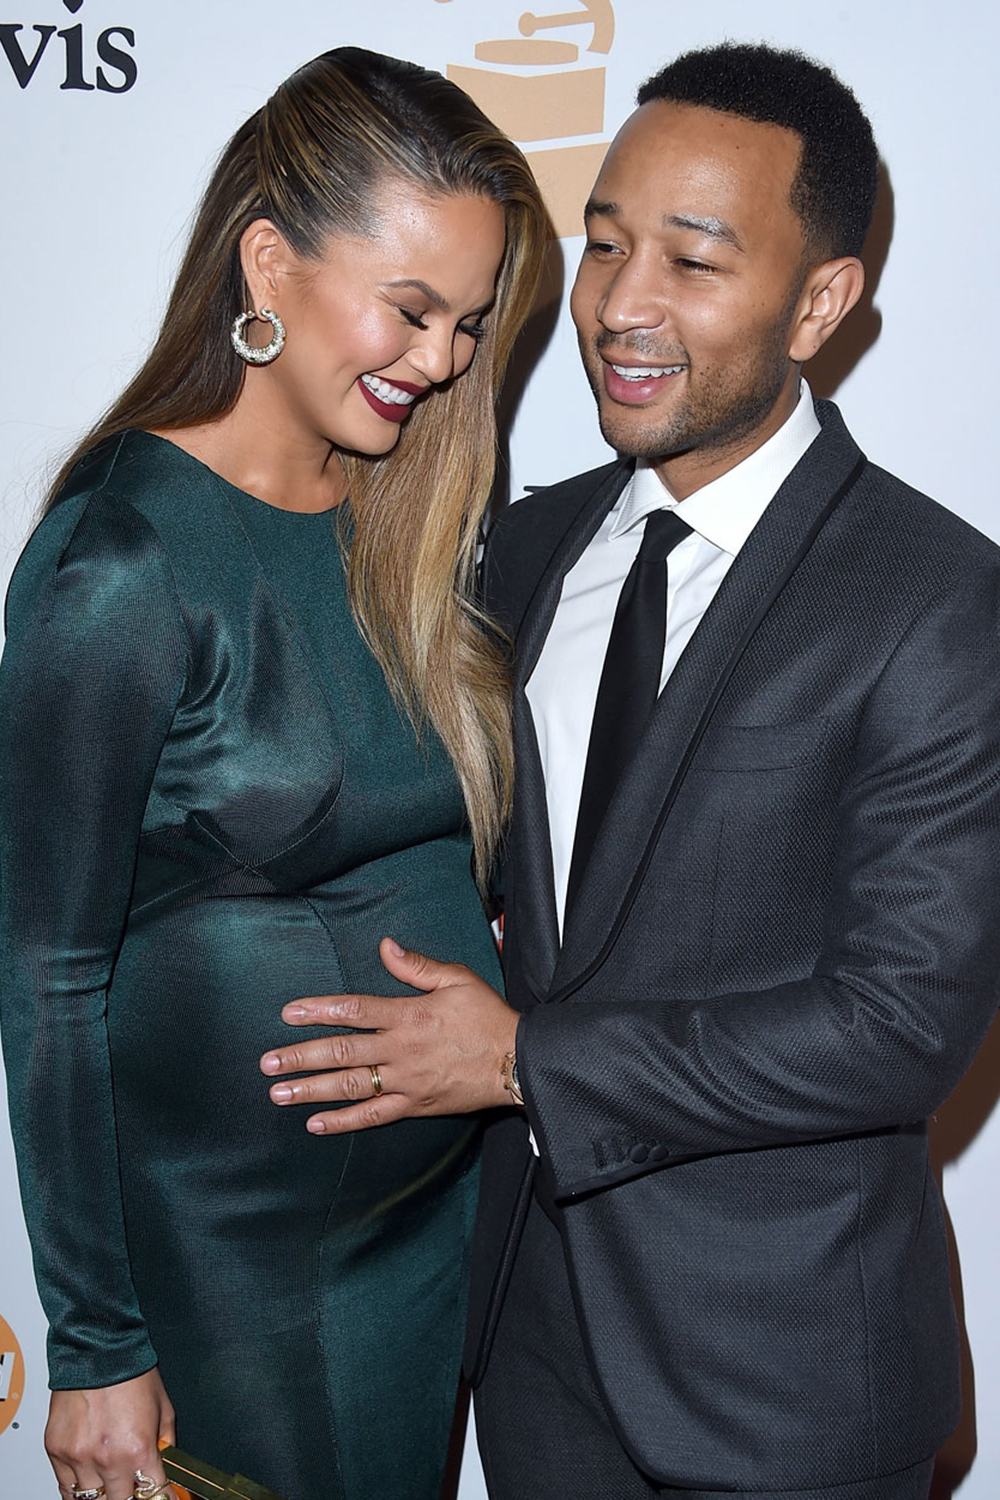 After meeting on the set of his music video Stereo in 2007, Chrissy Teigen and John Legend quickly started dating. The couple made it official in 2011 with a wedding in Lake Como, Italy and now have one daughter Luna who was born in 2015